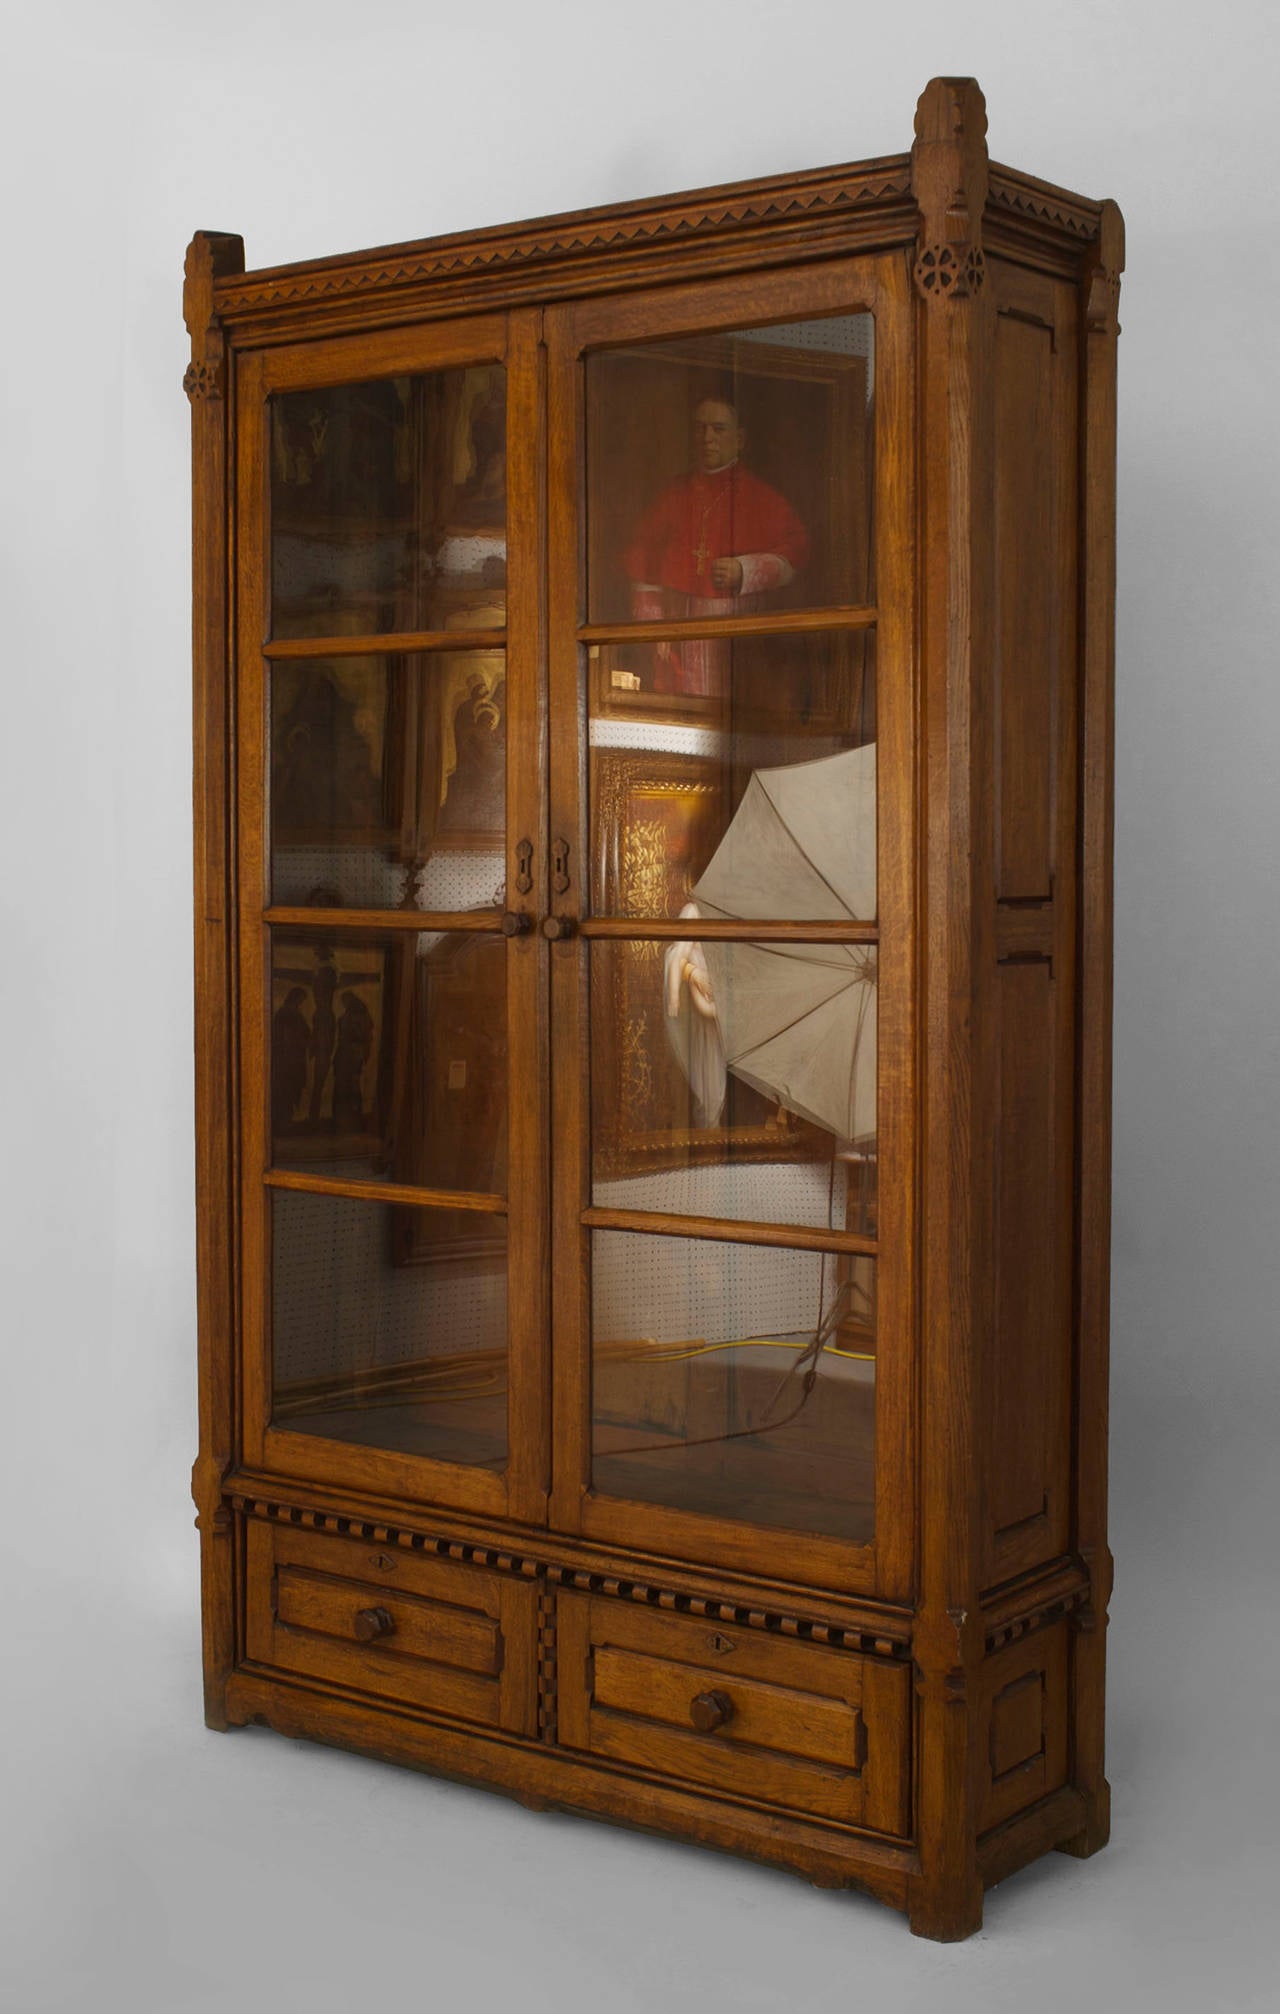 Pair of English Arts and Crafts (Aesthetic Movement) two glass door oak bookcase
cabinets with two bottom drawers and carved geometric trim and four shelves.